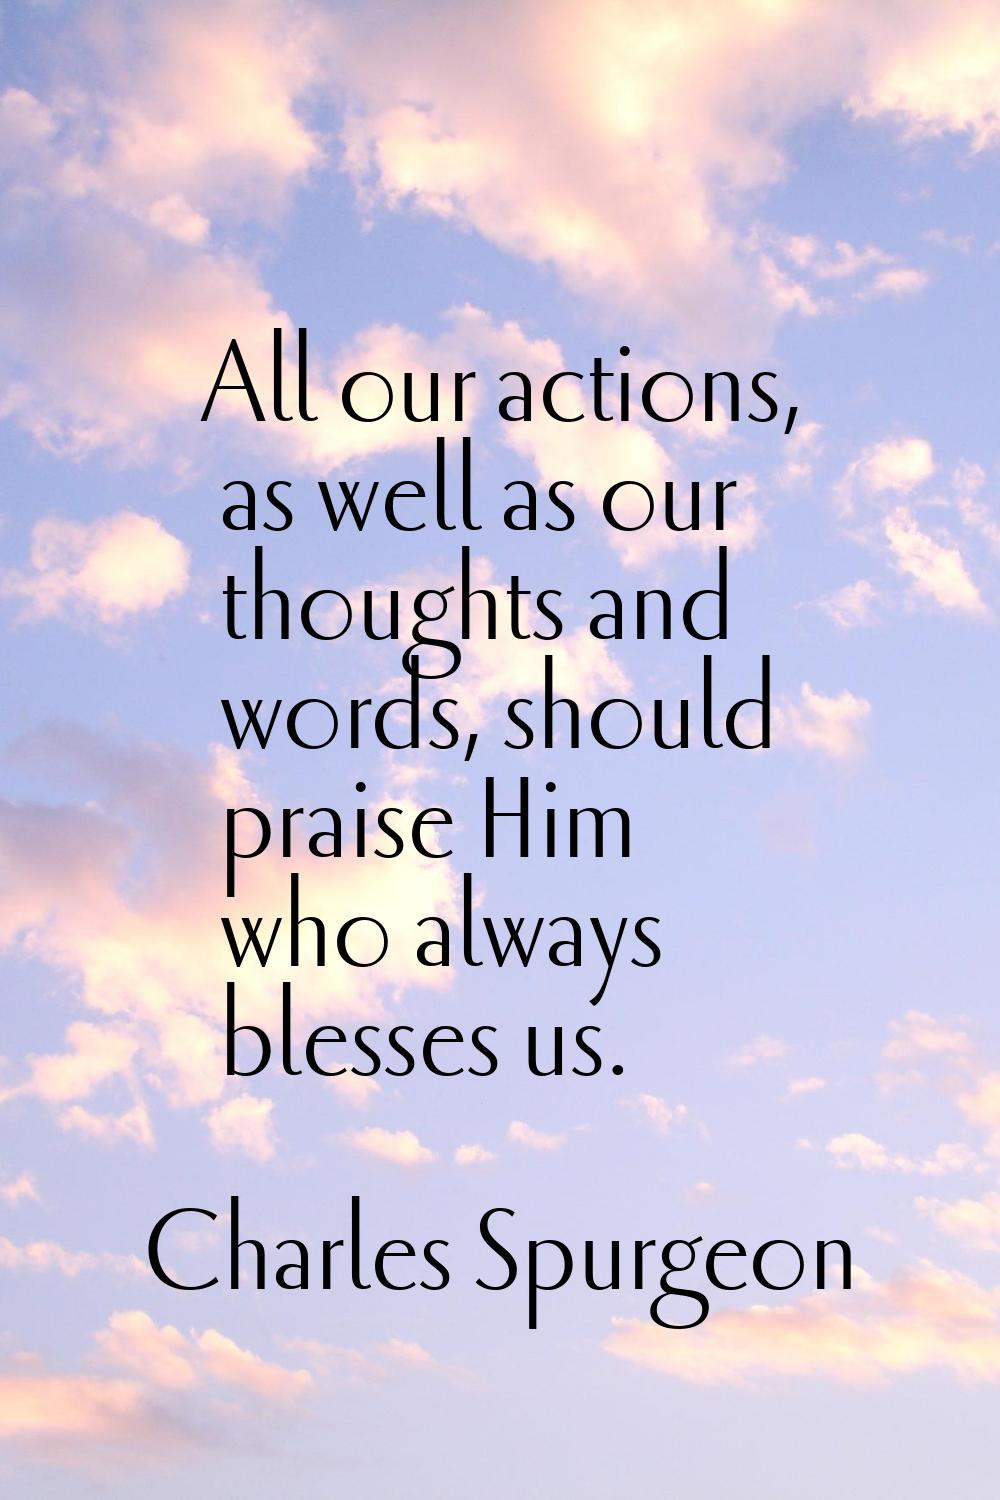 All our actions, as well as our thoughts and words, should praise Him who always blesses us.